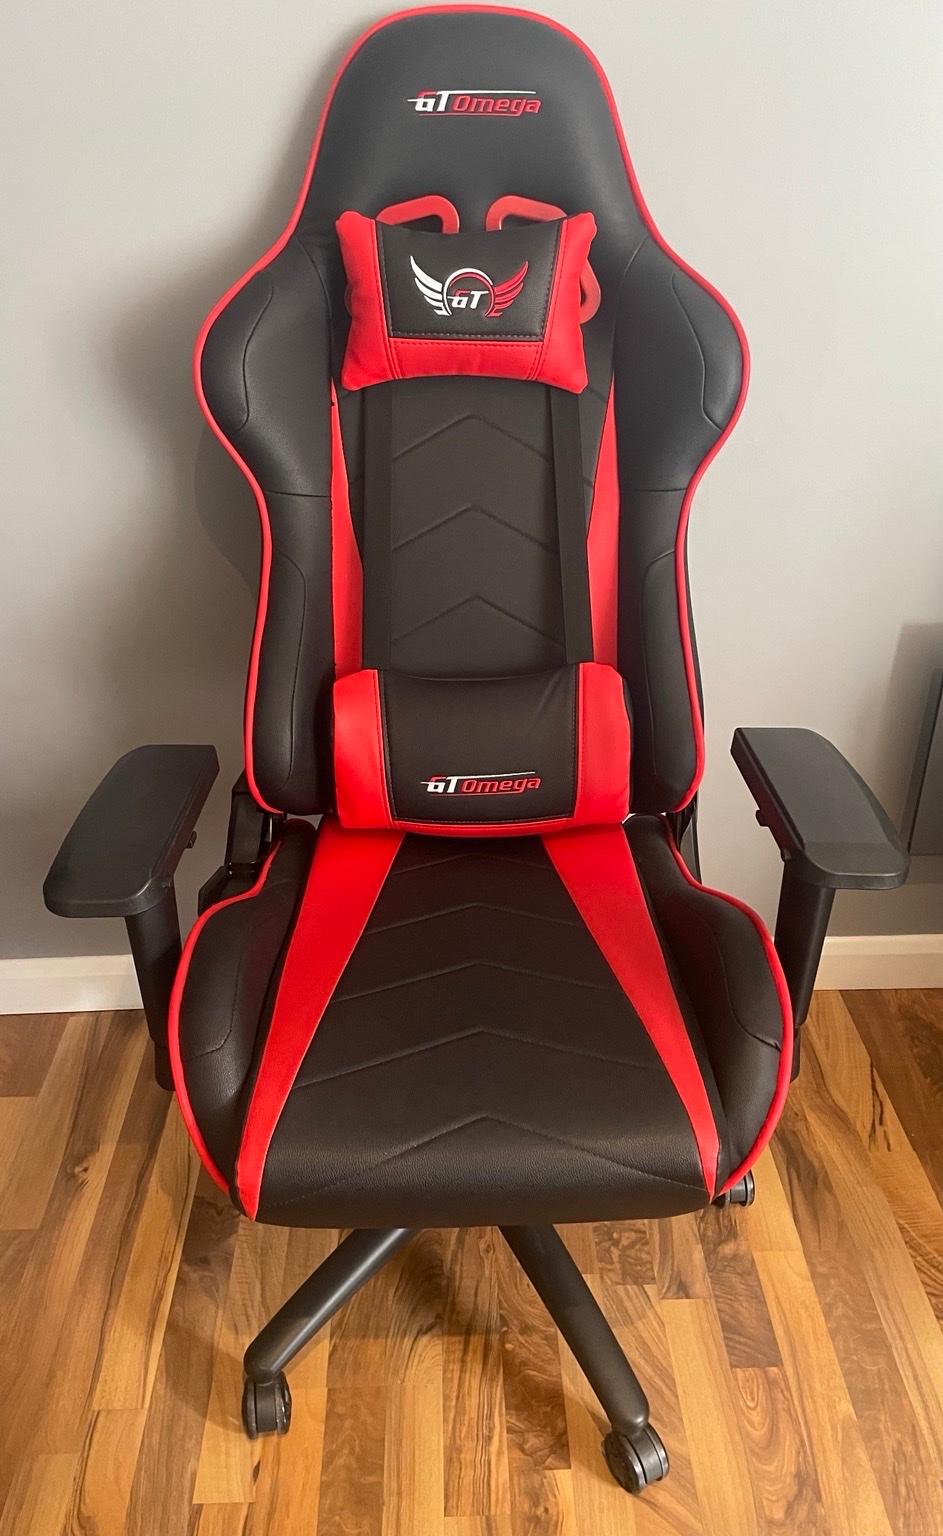 GT Omega Gaming Chair Red/Black - Hardly used in HU1 Hull for £80.00 ...